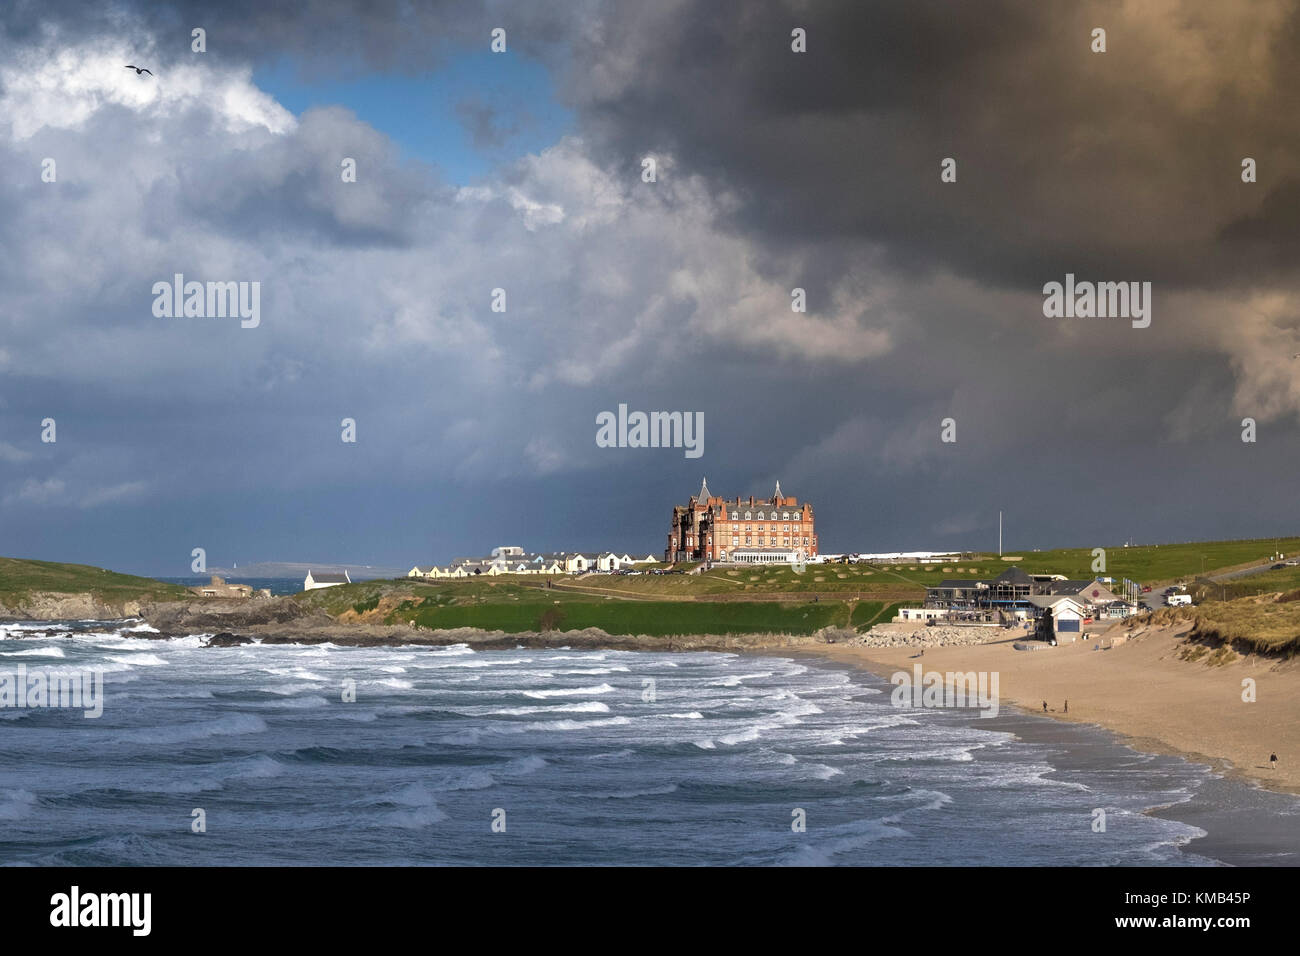 UK weather - stormy weather approaching Newquay on the North Cornwall coast. Stock Photo